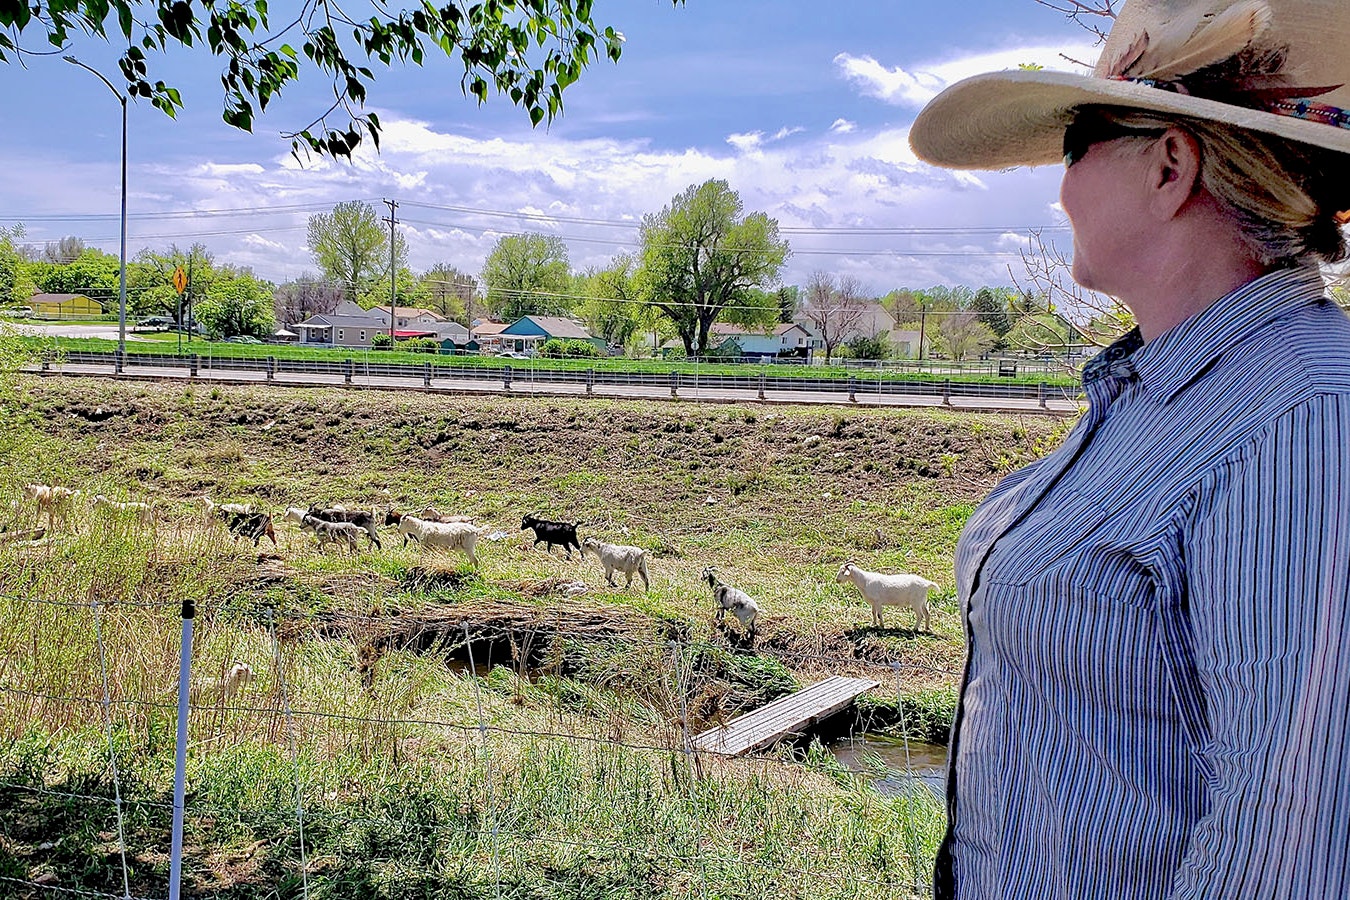 Lani Malmberg grew up on a ranch in Lander, and now operates a small army of 500 cashmere goats that travel around the U.S. West eating weeds.